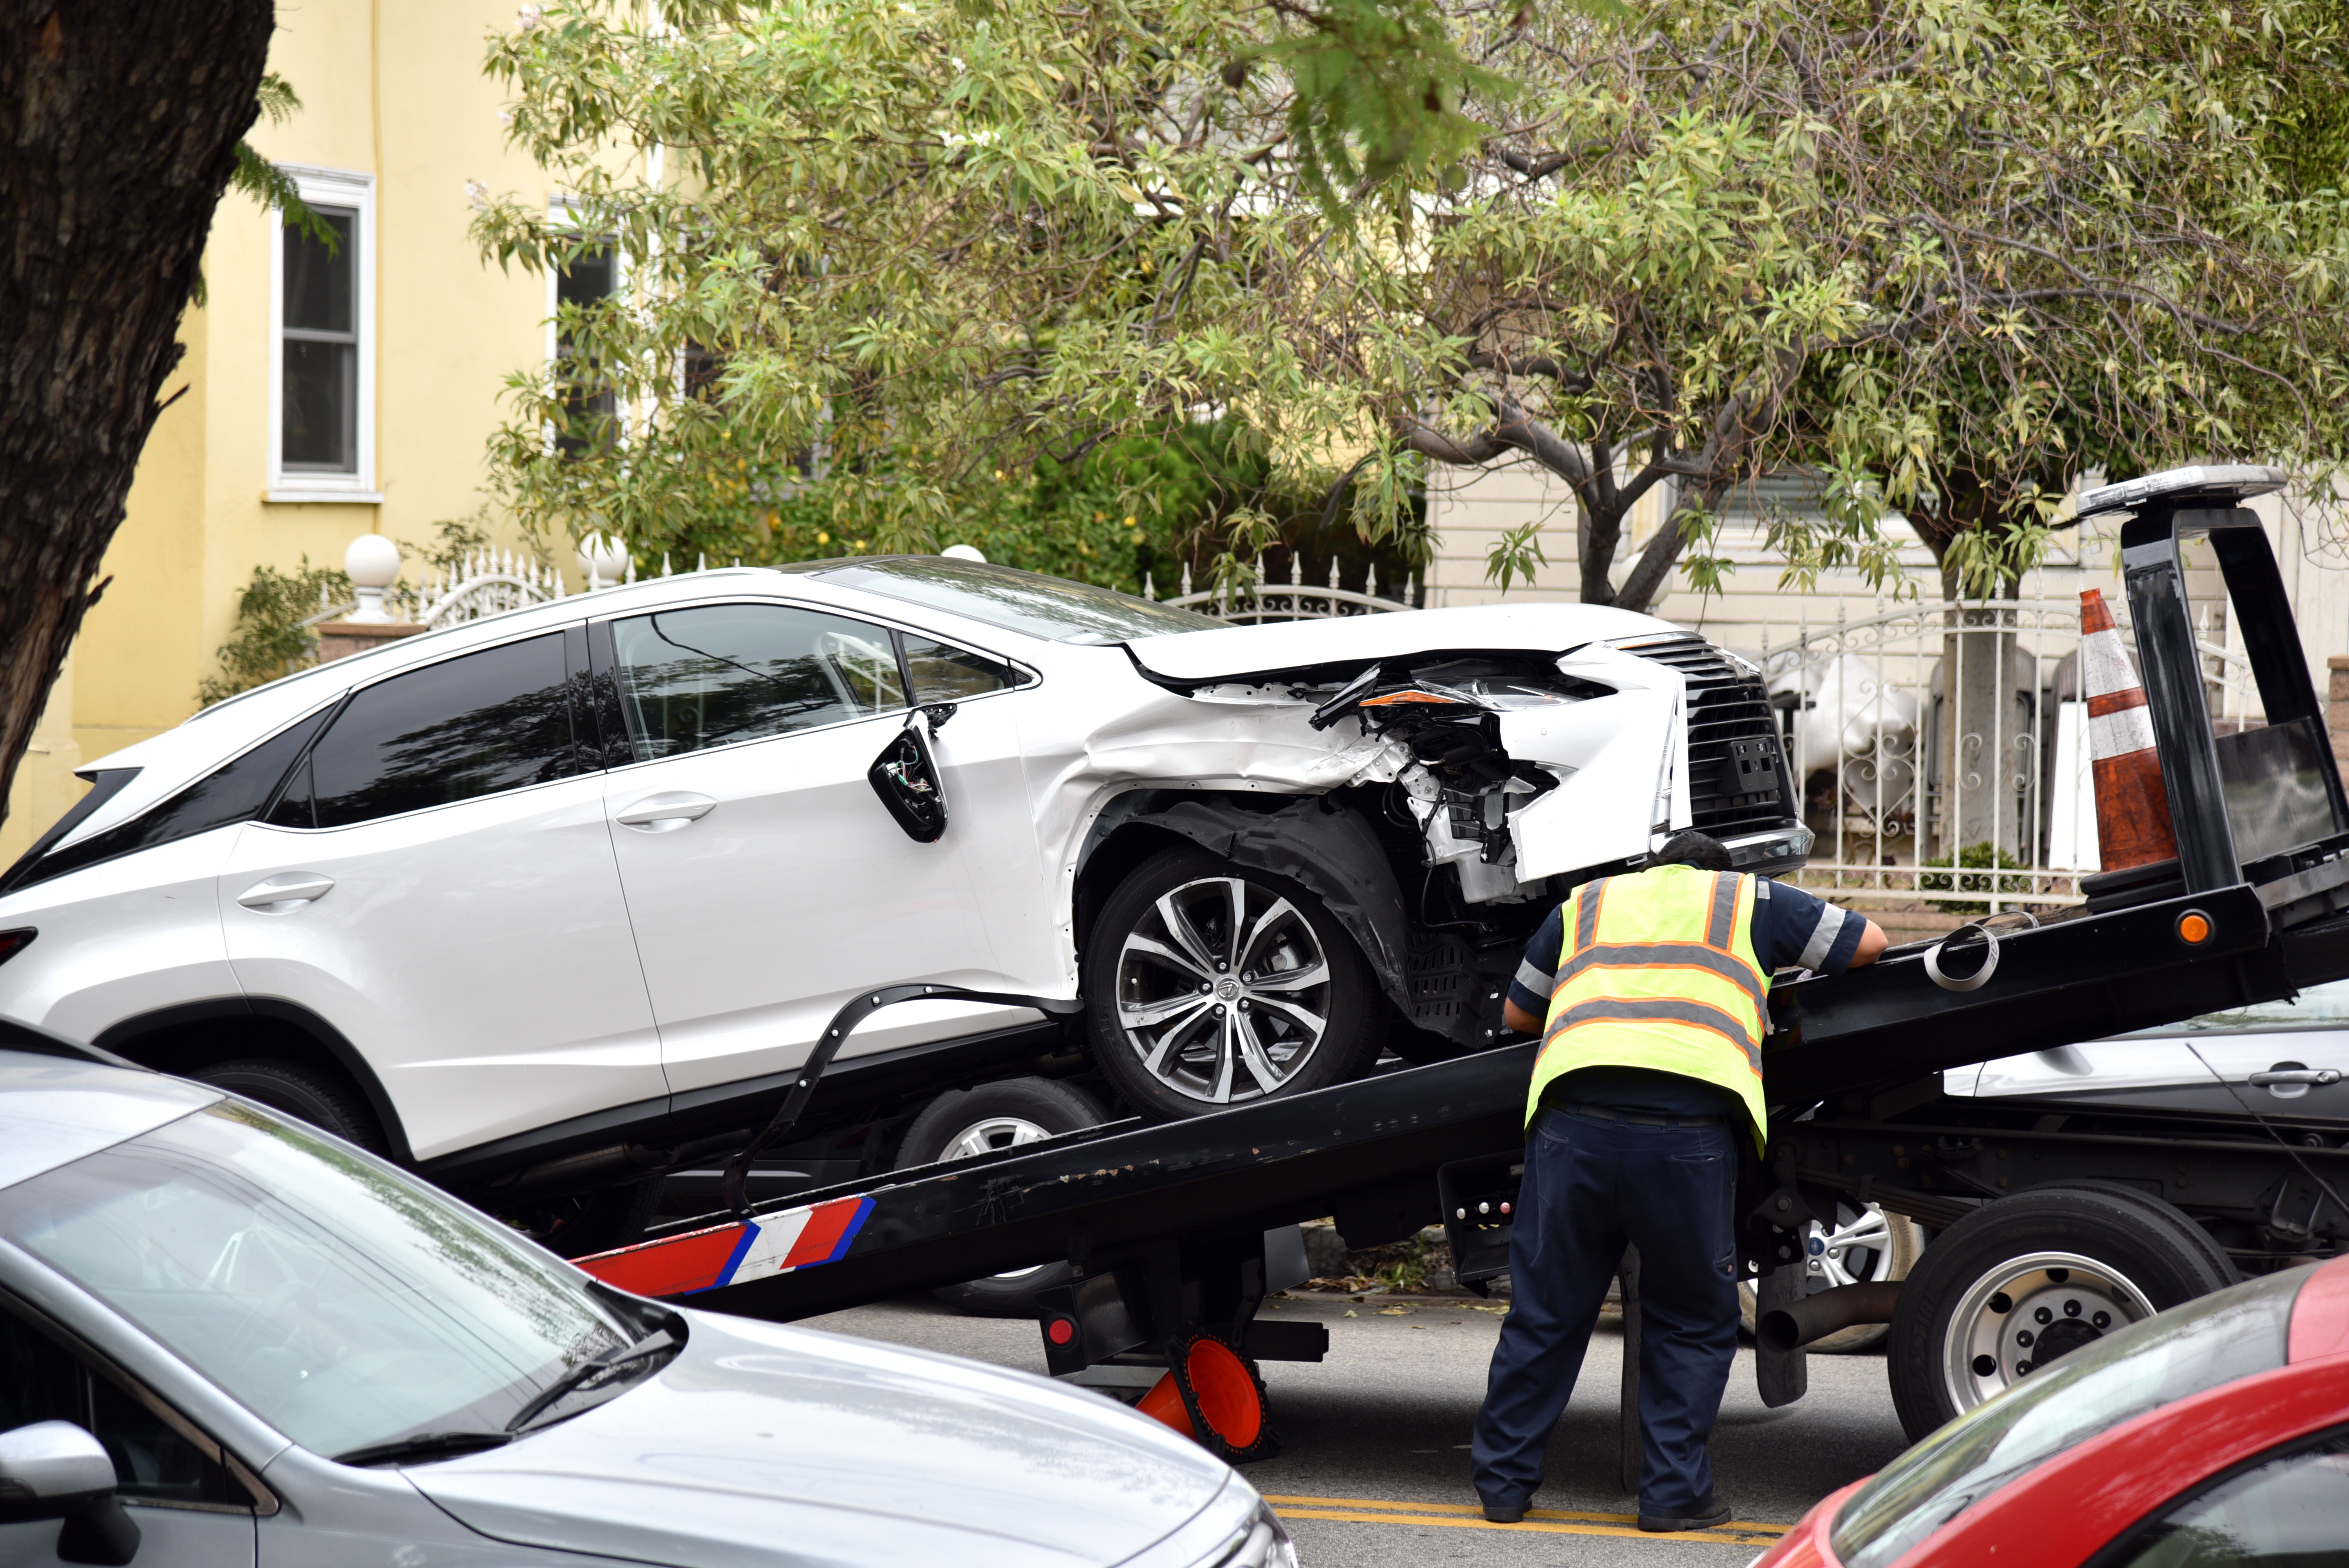 A tow truck driver towing a damaged car. | Source: Shutterstock